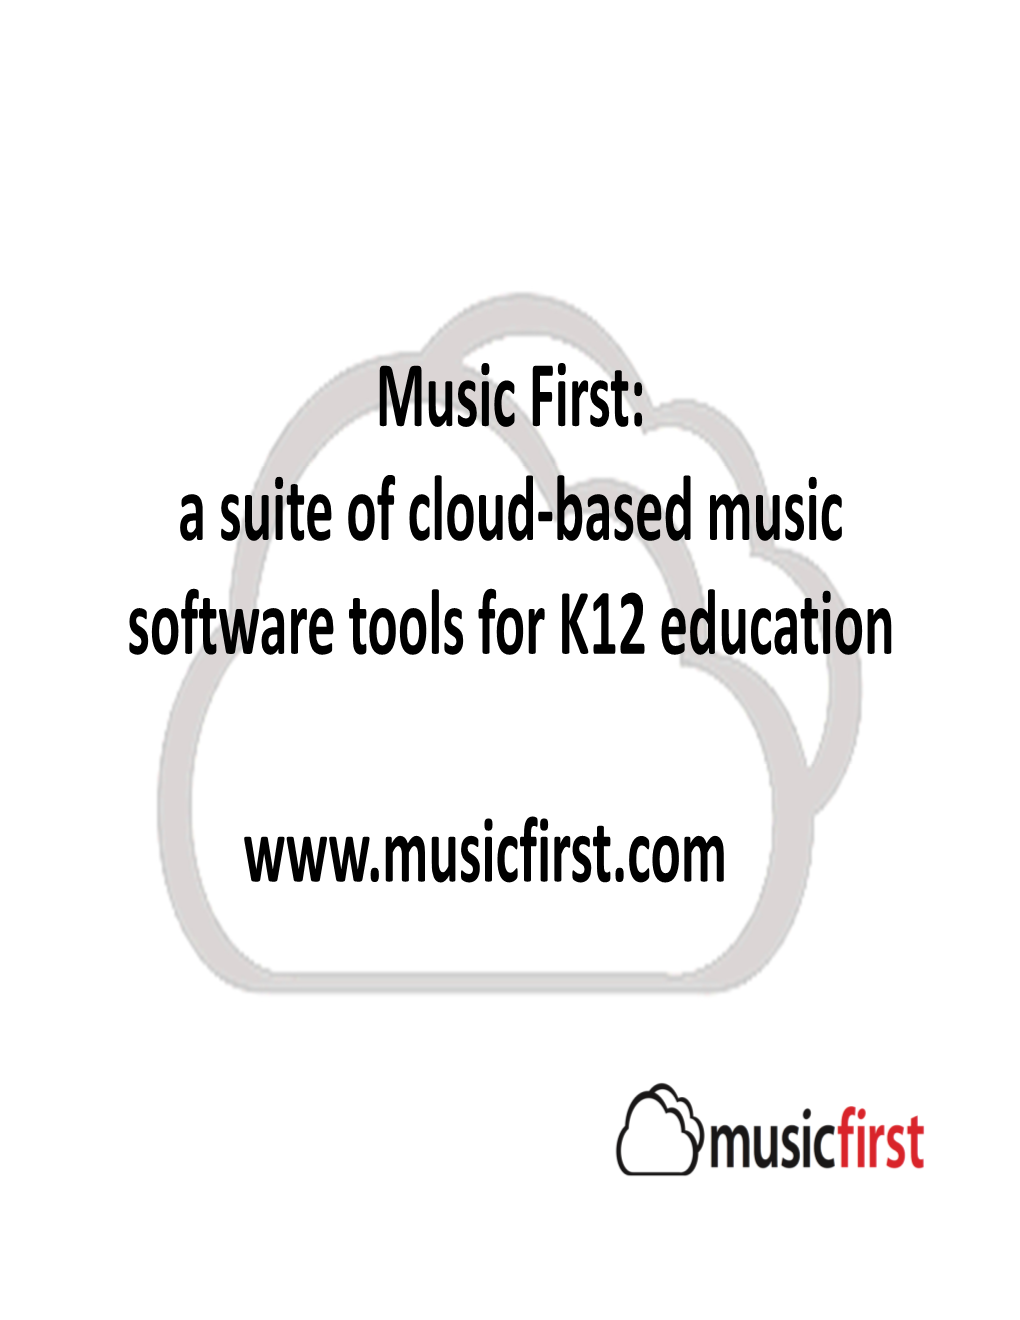 Music First: a Suite of Cloud-Based Music Software Tools for K12 Education